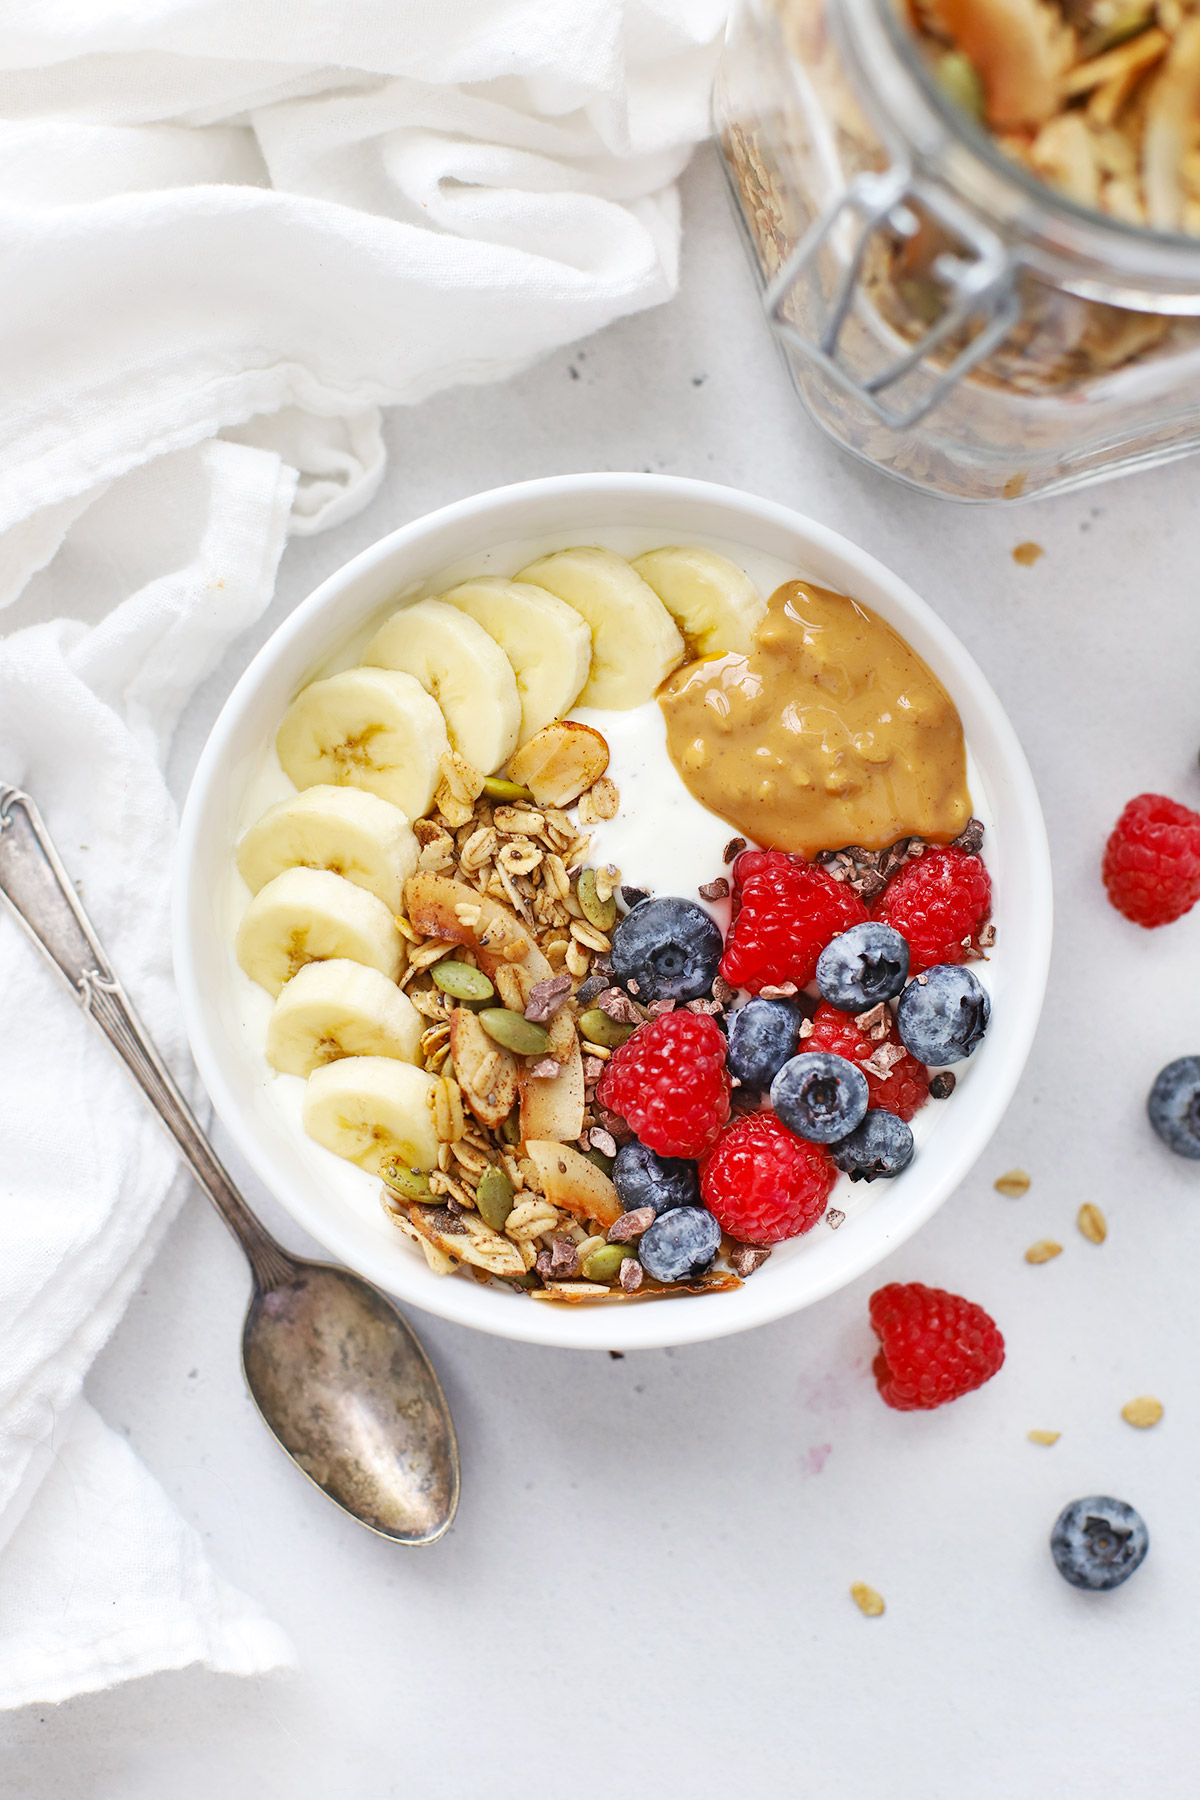 Overhead view of Yogurt Bowl with Warm Spiced Granola, fresh berries, sliced banana, and peanut butter